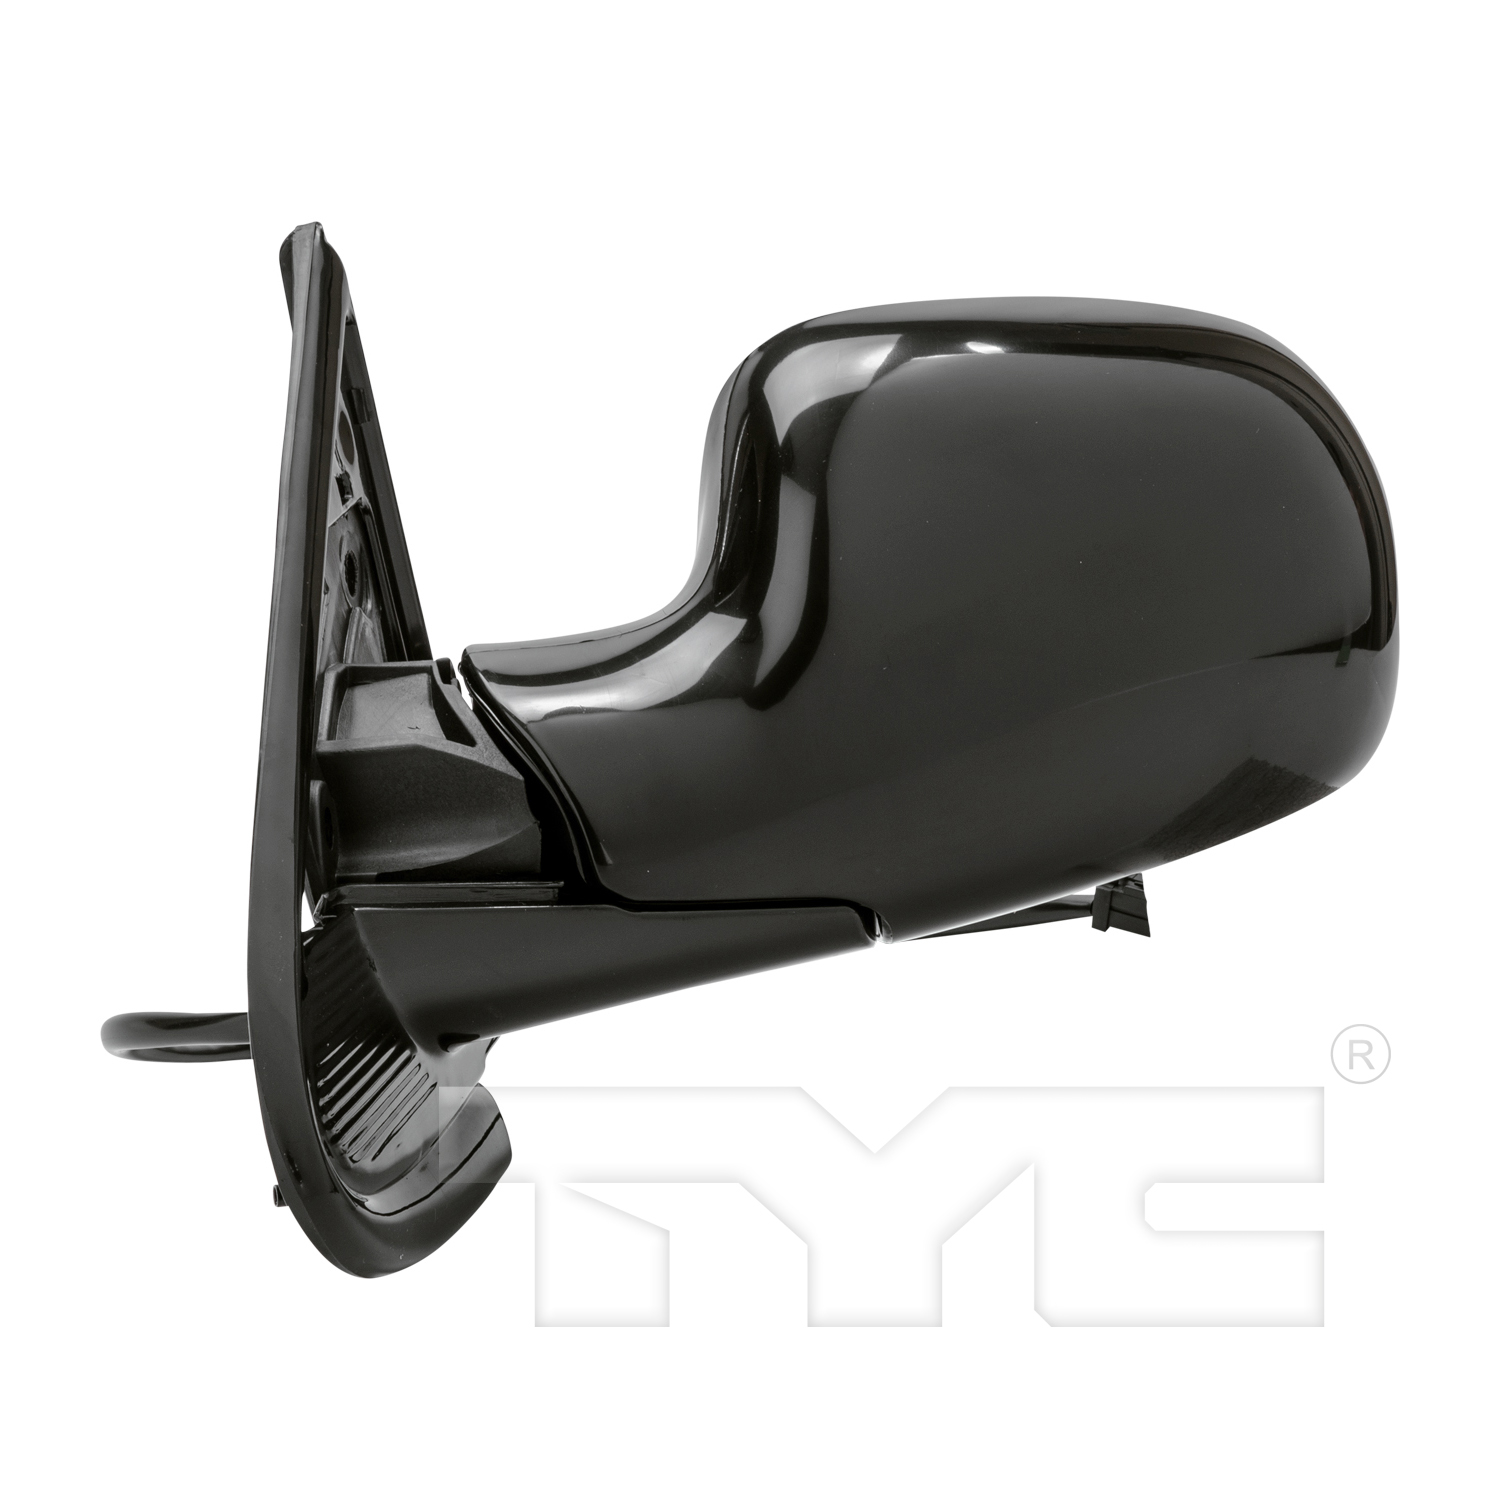 Aftermarket MIRRORS for CHRYSLER - VOYAGER, VOYAGER,01-03,LT Mirror outside rear view